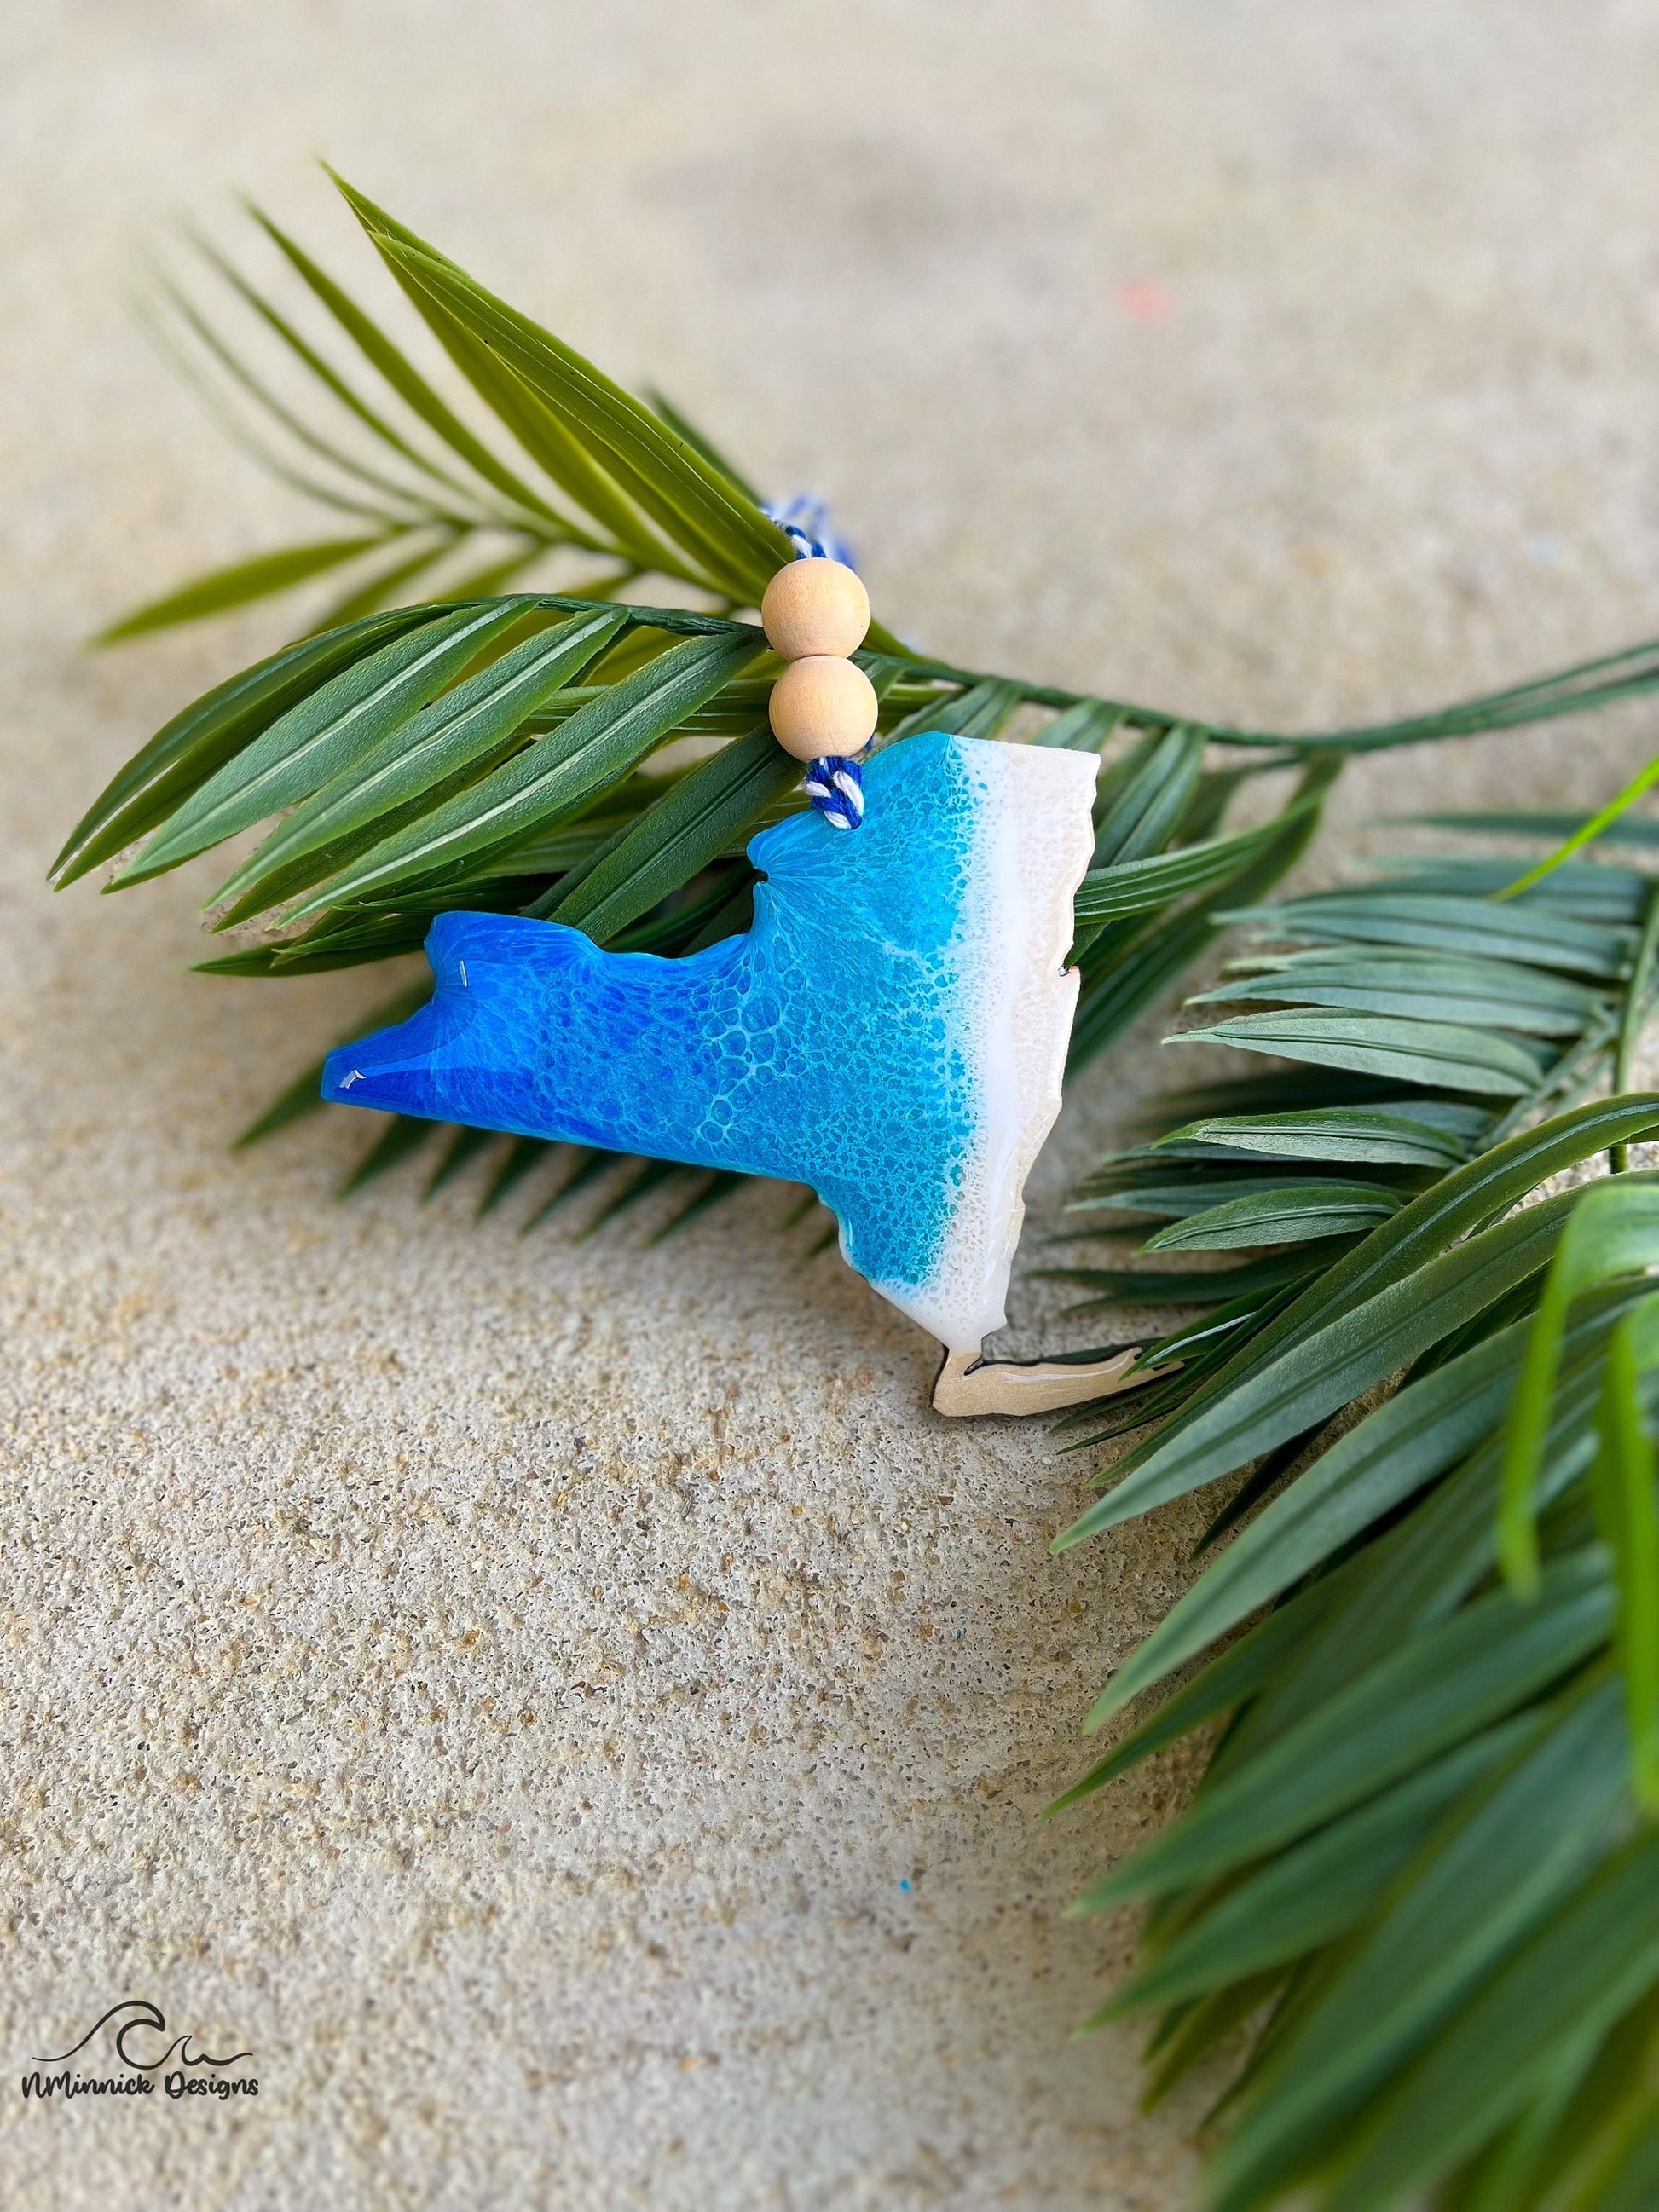 New York ornament with ocean resin art laying against palm leaves.